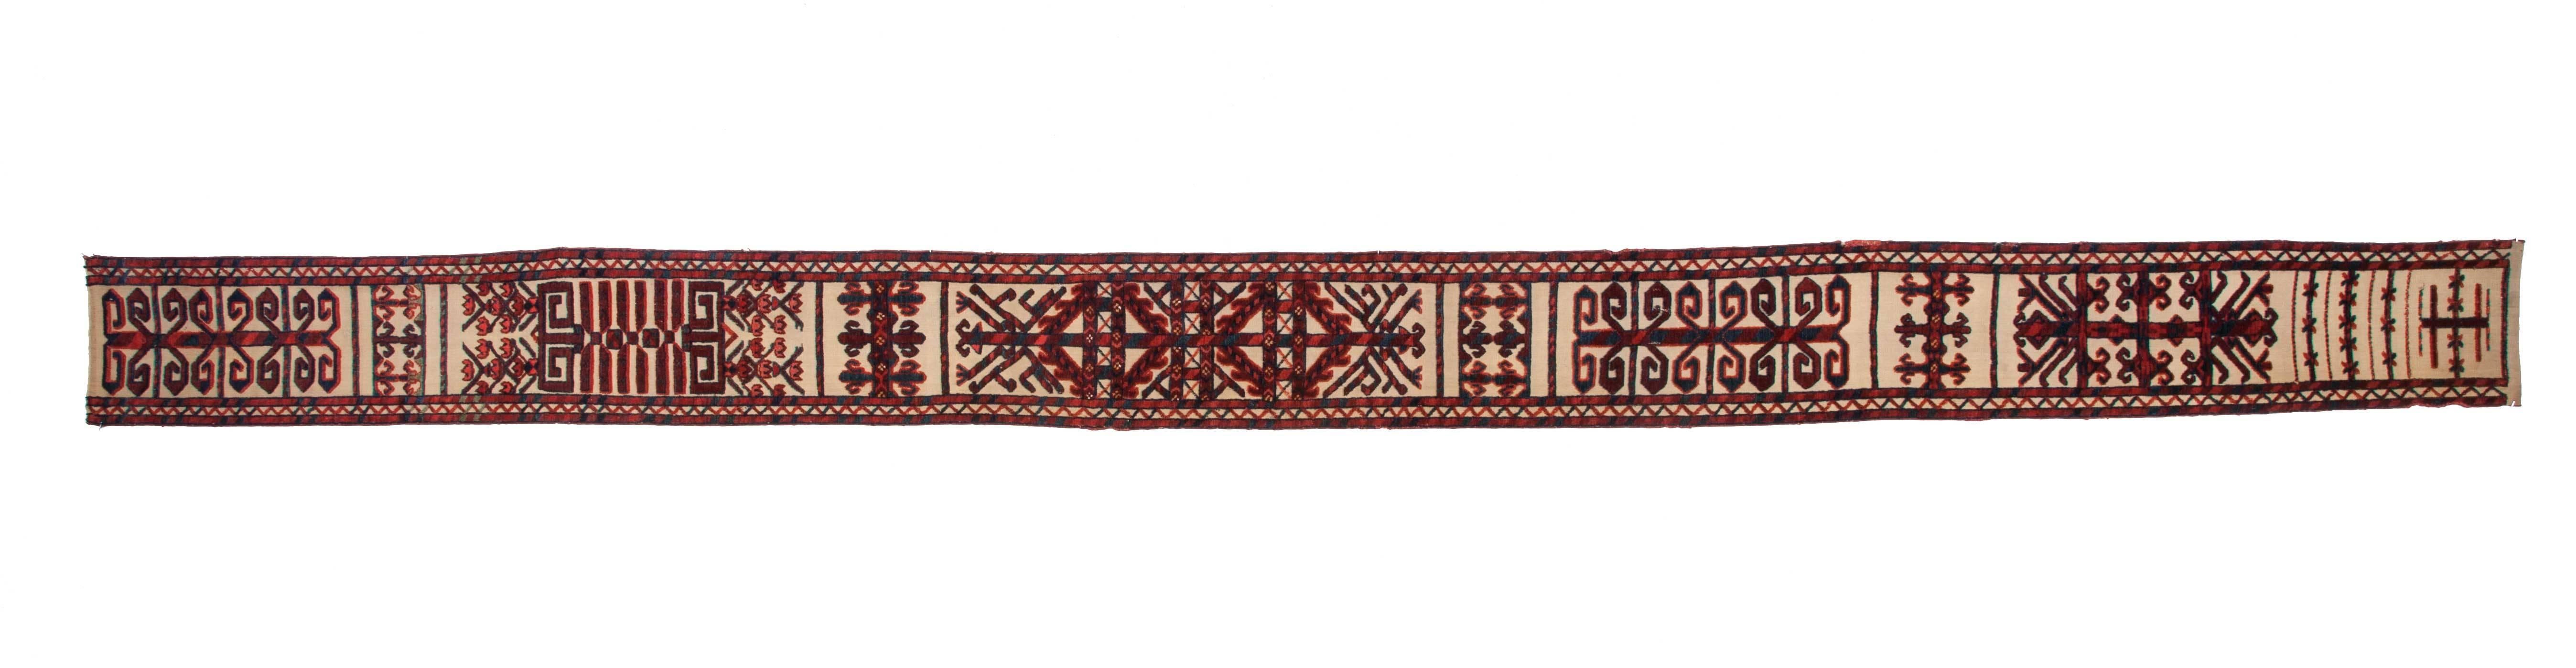 Tribal Mid-19th Century Turkmen Tekke Tribe Tent Band Fragment Wt Great Colors and Wool For Sale